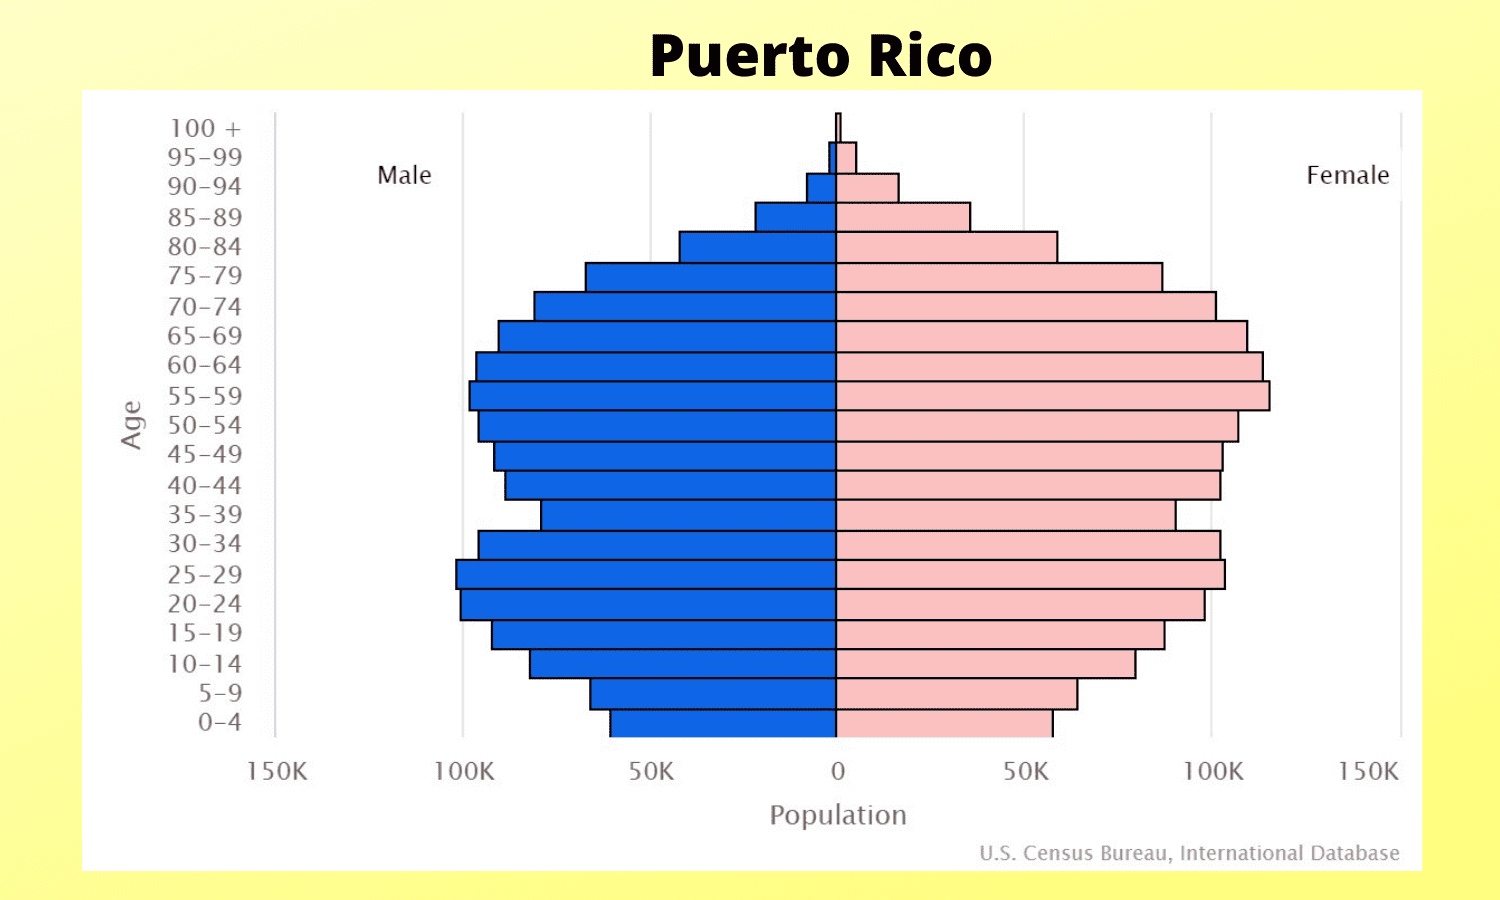 A population pyramid for Puerto Rico shows population by age cohort and gender